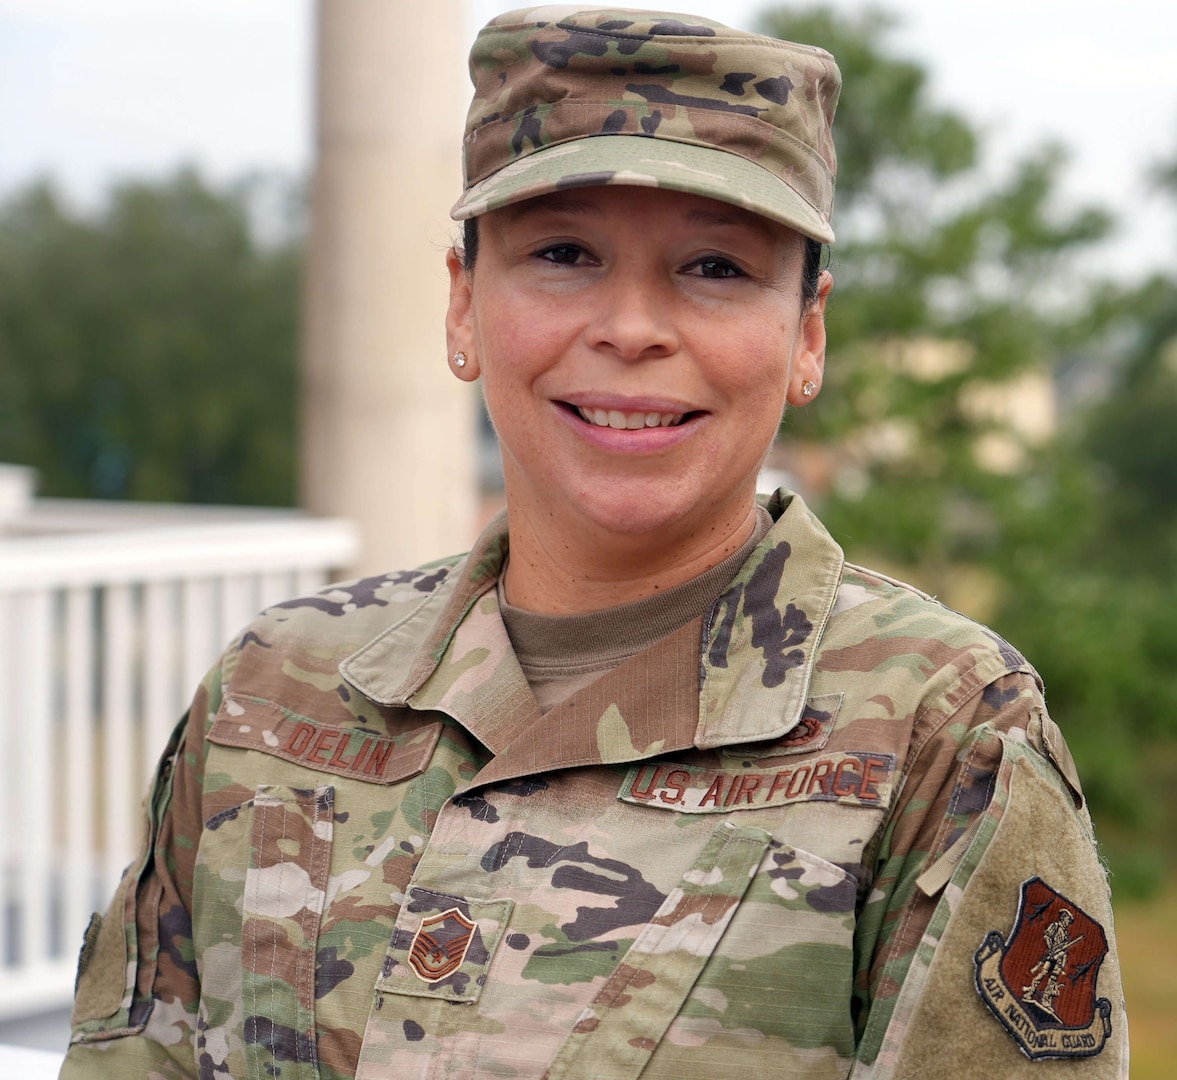 Master Sgt. Rasia Delin, originally from Dulac, Louisiana, is a member of the Houma Indian Tribe, one of the original inhabitant tribes of the area. She is currently assigned to Joint Force Headquarters, Louisiana Air National Guard (LAANG) as a personnel craftsman.